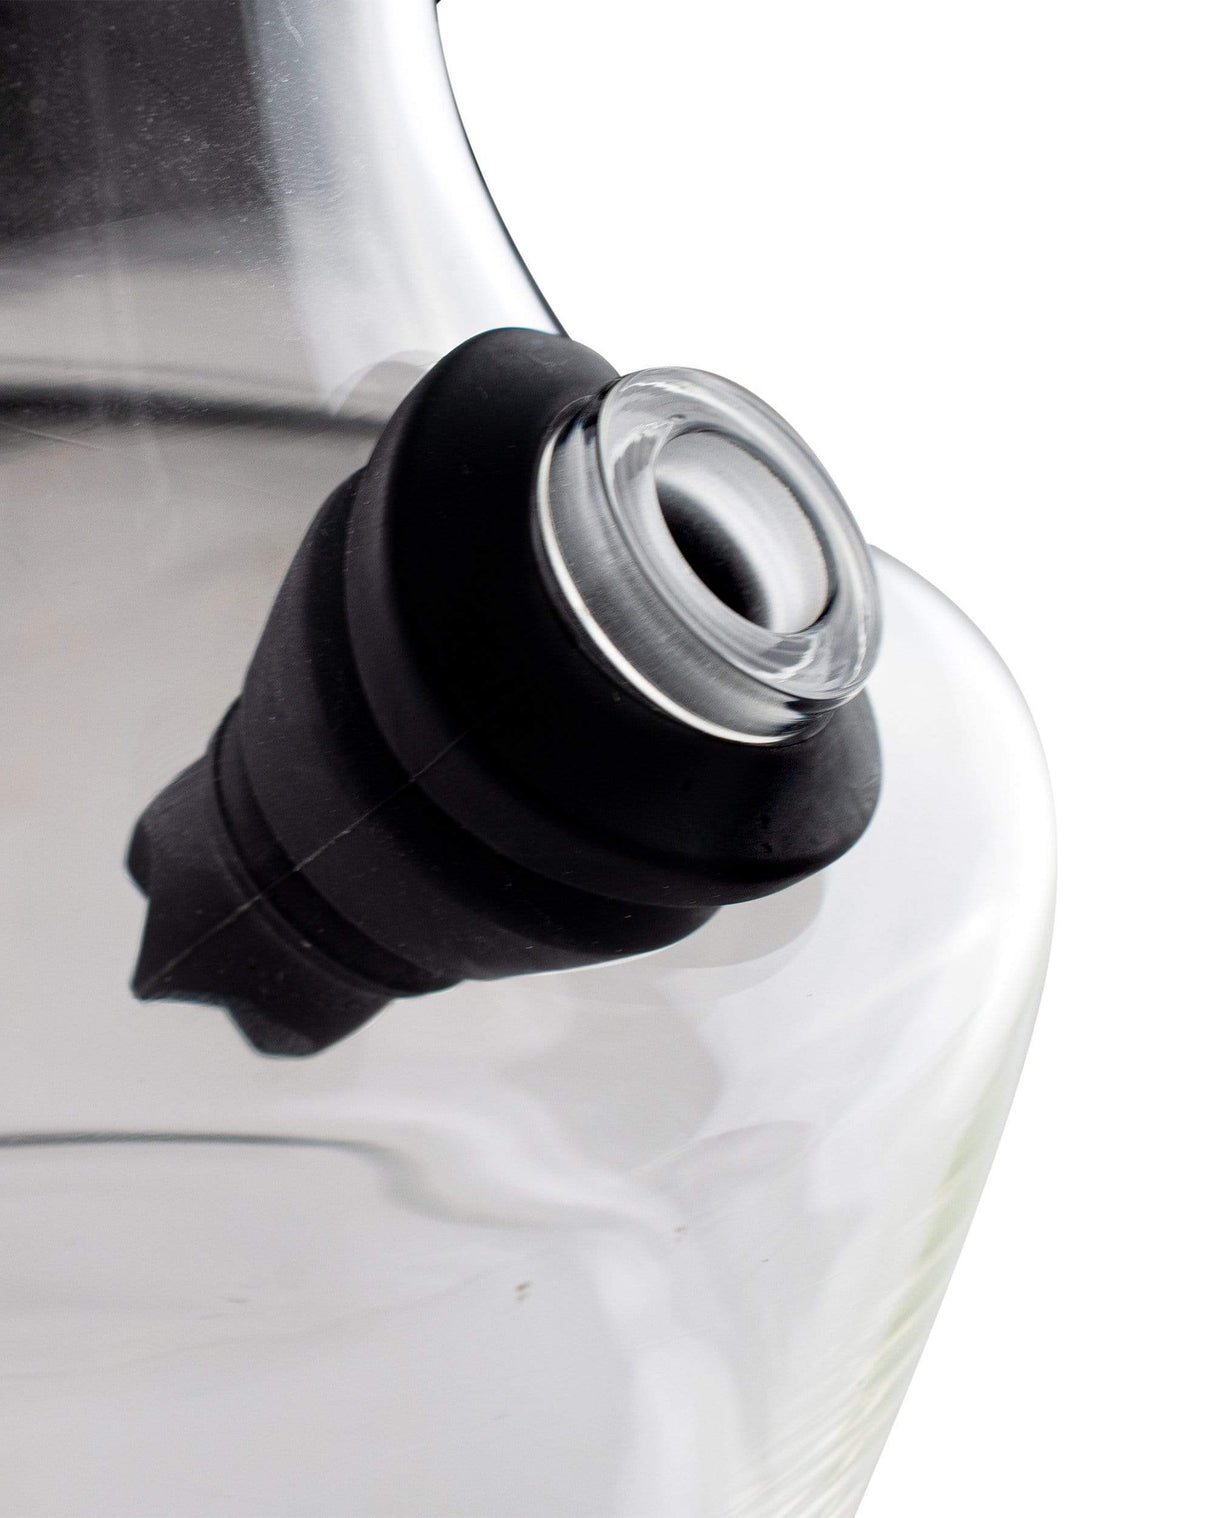 Close-up of High Rise Gravity Bong neck with clear borosilicate glass and silicone seal